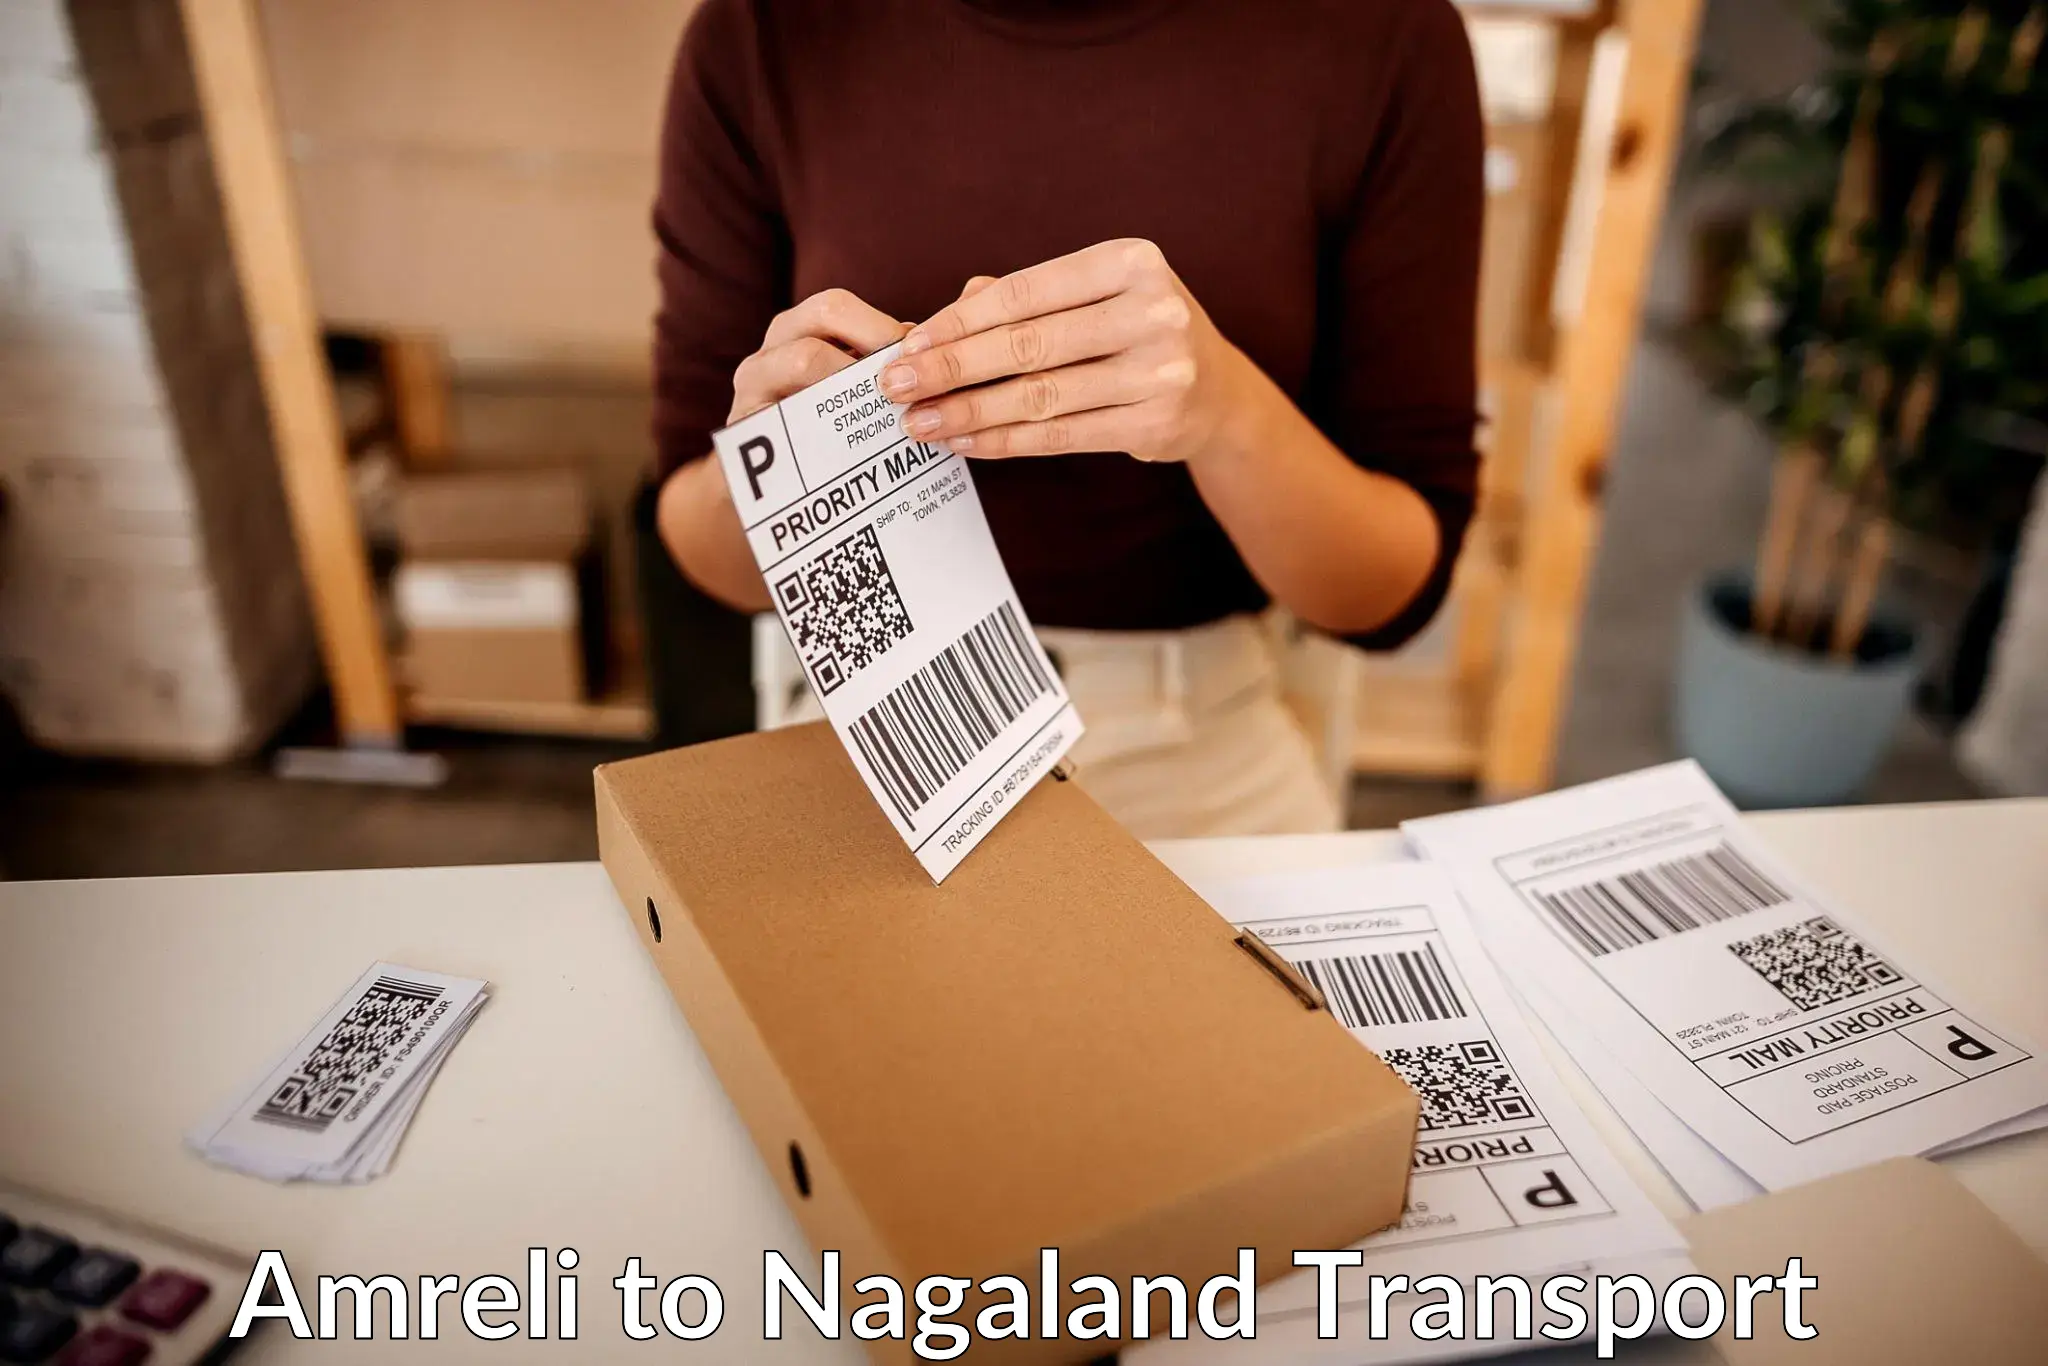 Container transport service Amreli to Nagaland